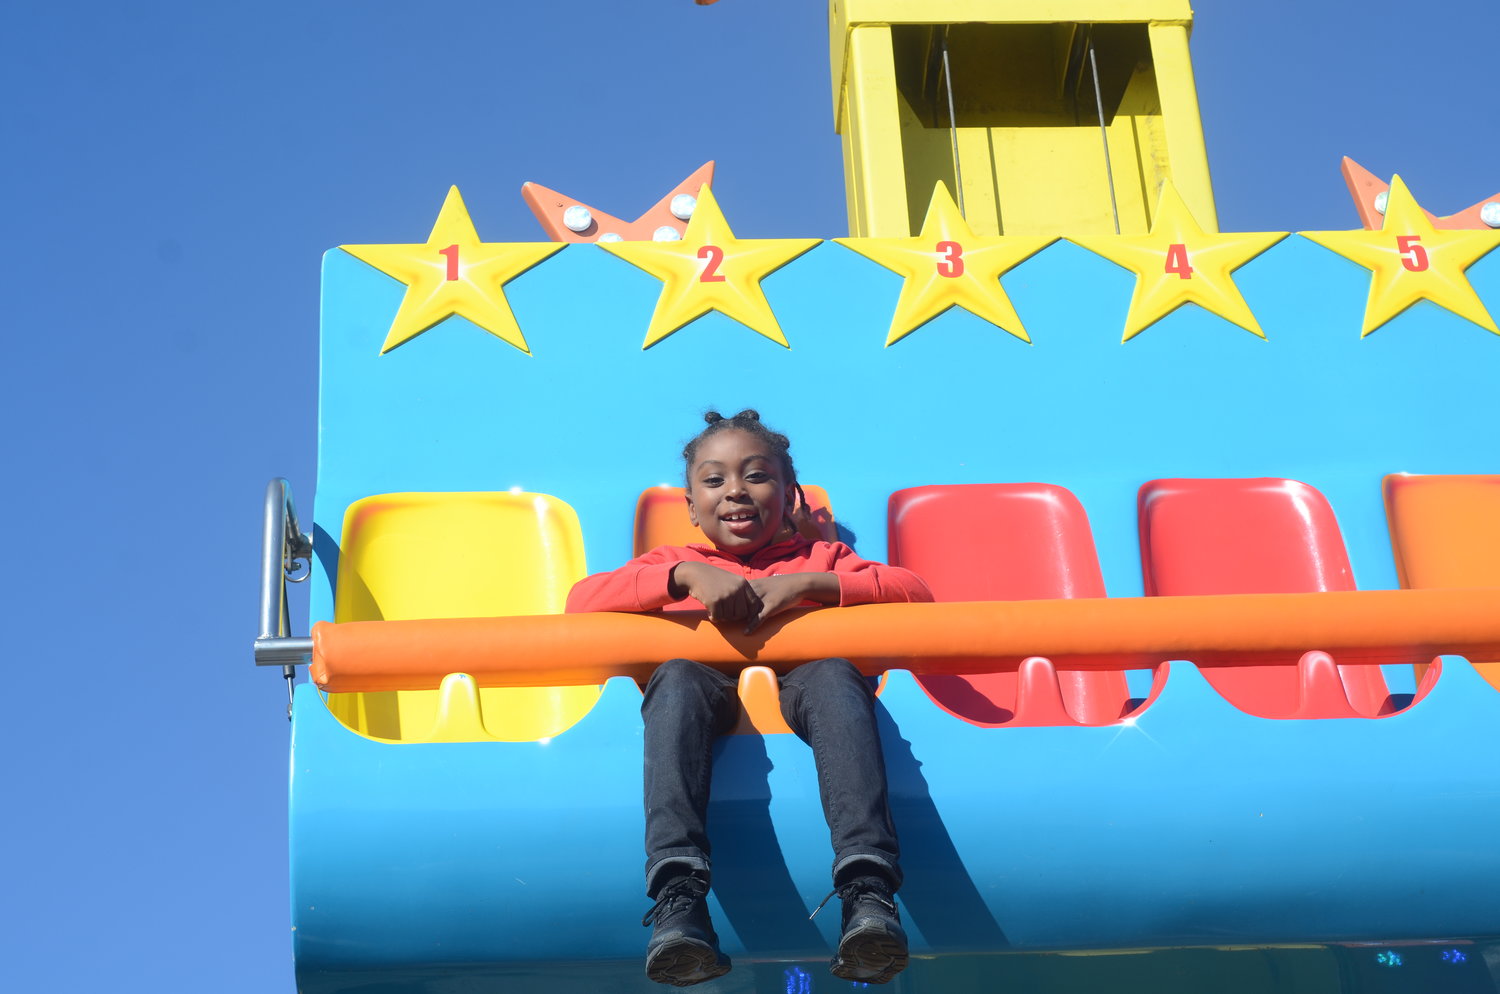 Makai Sneed, above, and his mom came from Queens to the carnival to see what the excitement was all about.